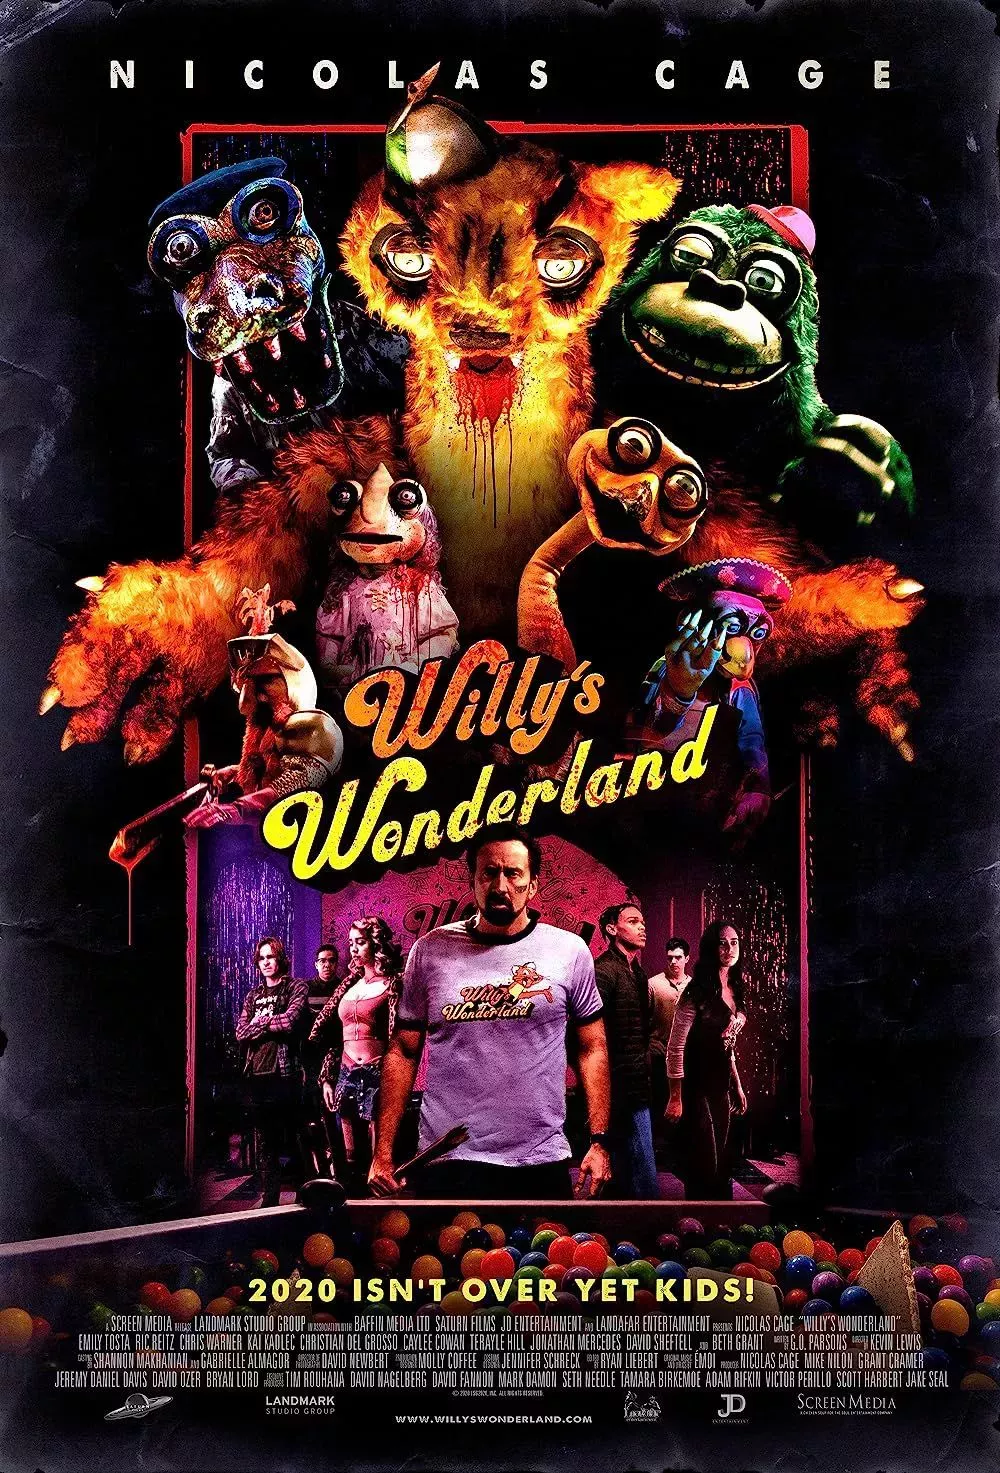 Nicolas Cage and the Cast in Willy's Wonderland